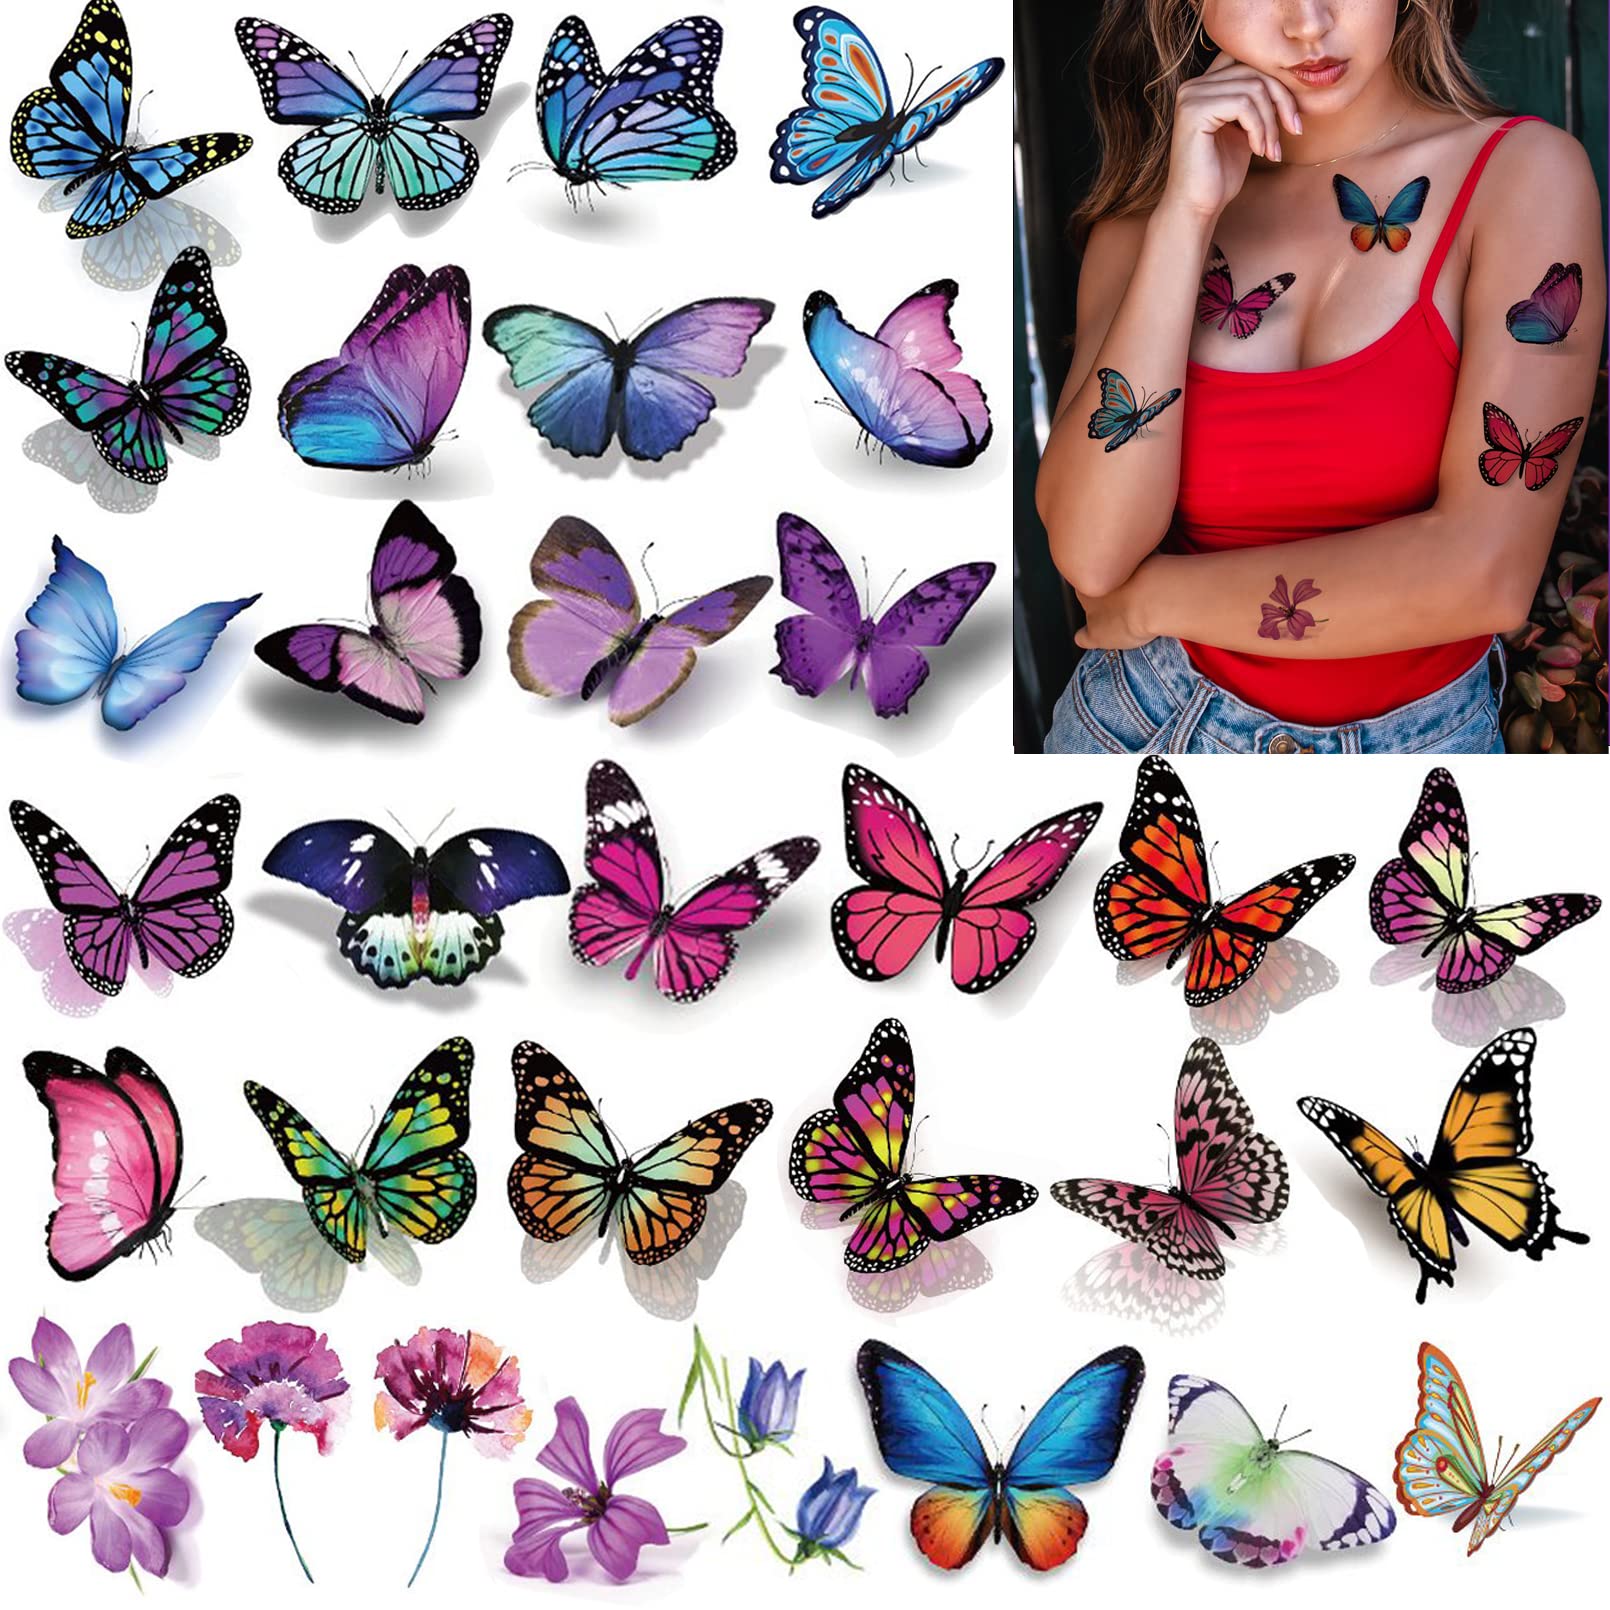 Coszeos 120Pcs Butterfly Temporary Tattoos for Women Girls Kids